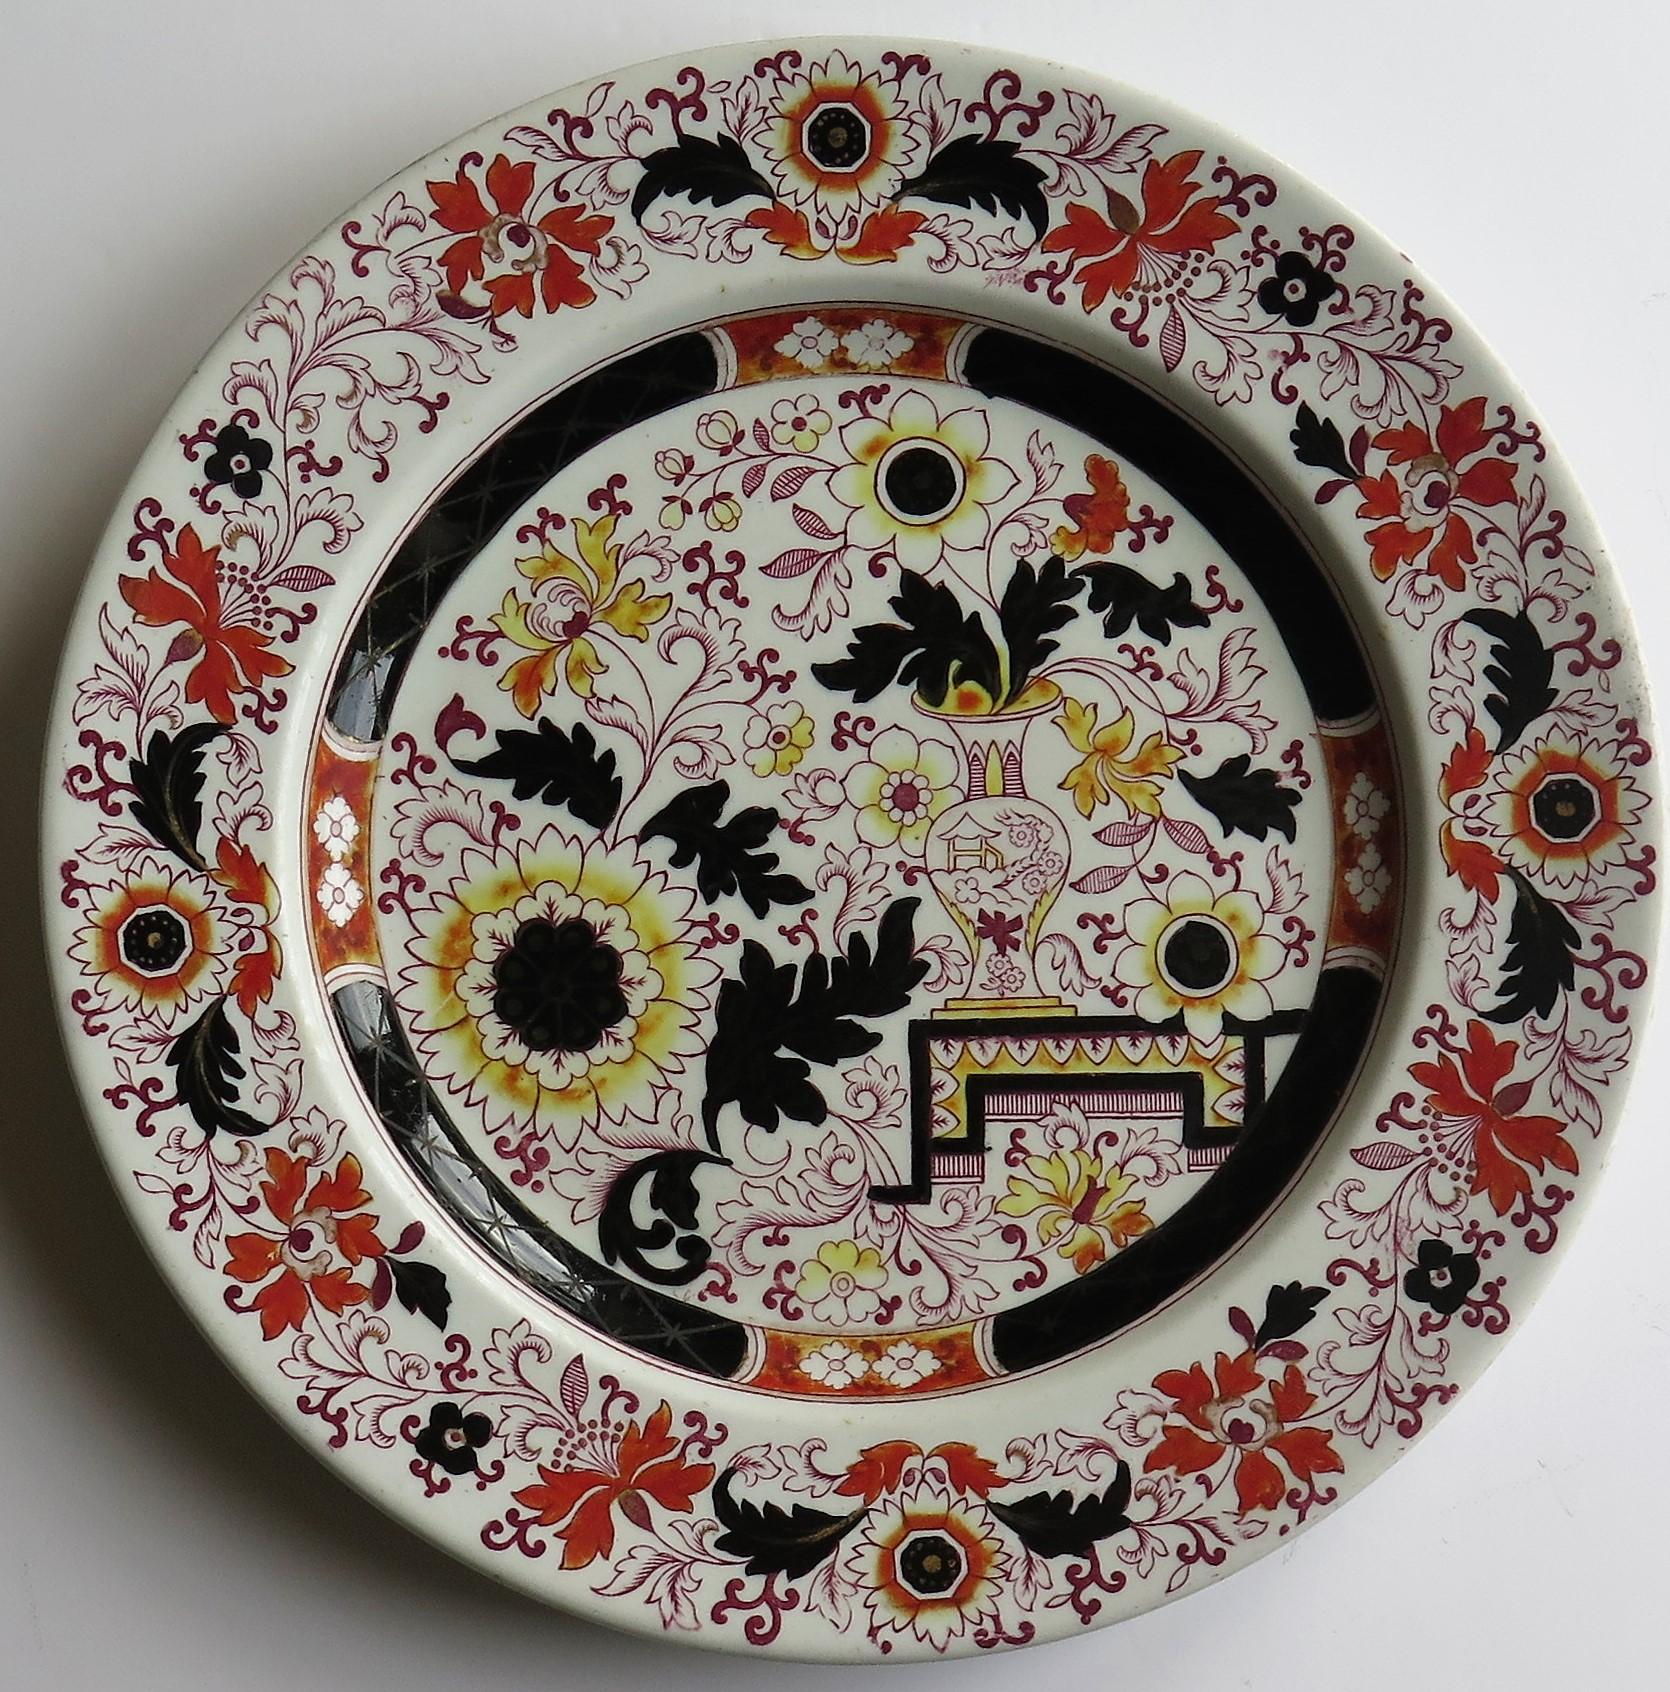 This is a mid-19th century Mason’s ironstone dinner plate produced at the time when Mason's was owned and controlled by George L Ashworth after the bankruptcy of C J Mason in 1848.

This large plate is decorated in a striking chinoiserie pattern